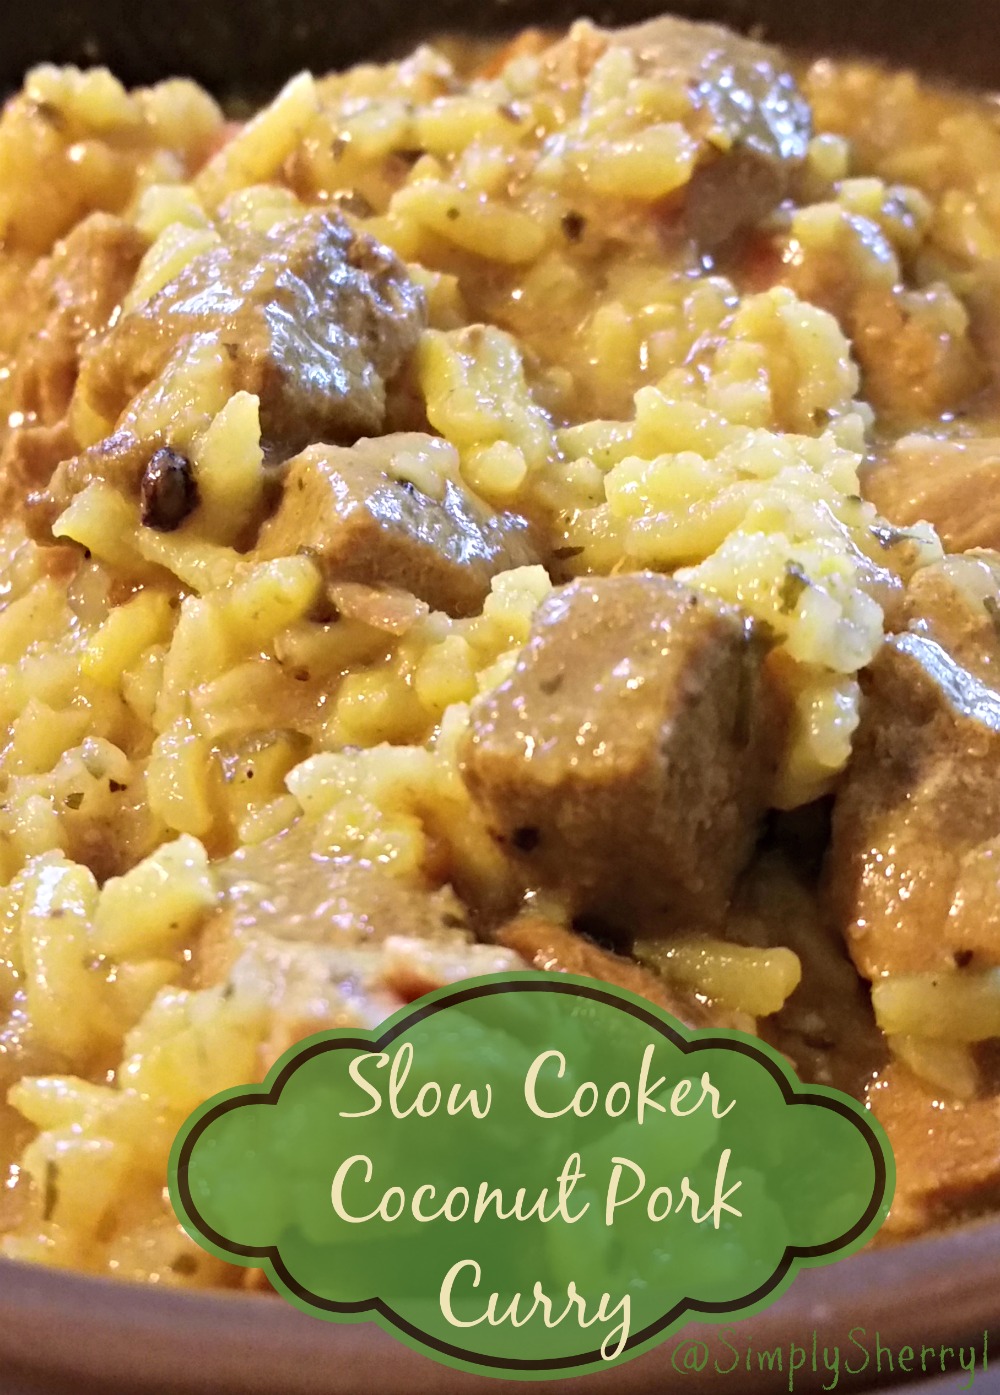 Slow Cooker Coconut Pork Curry